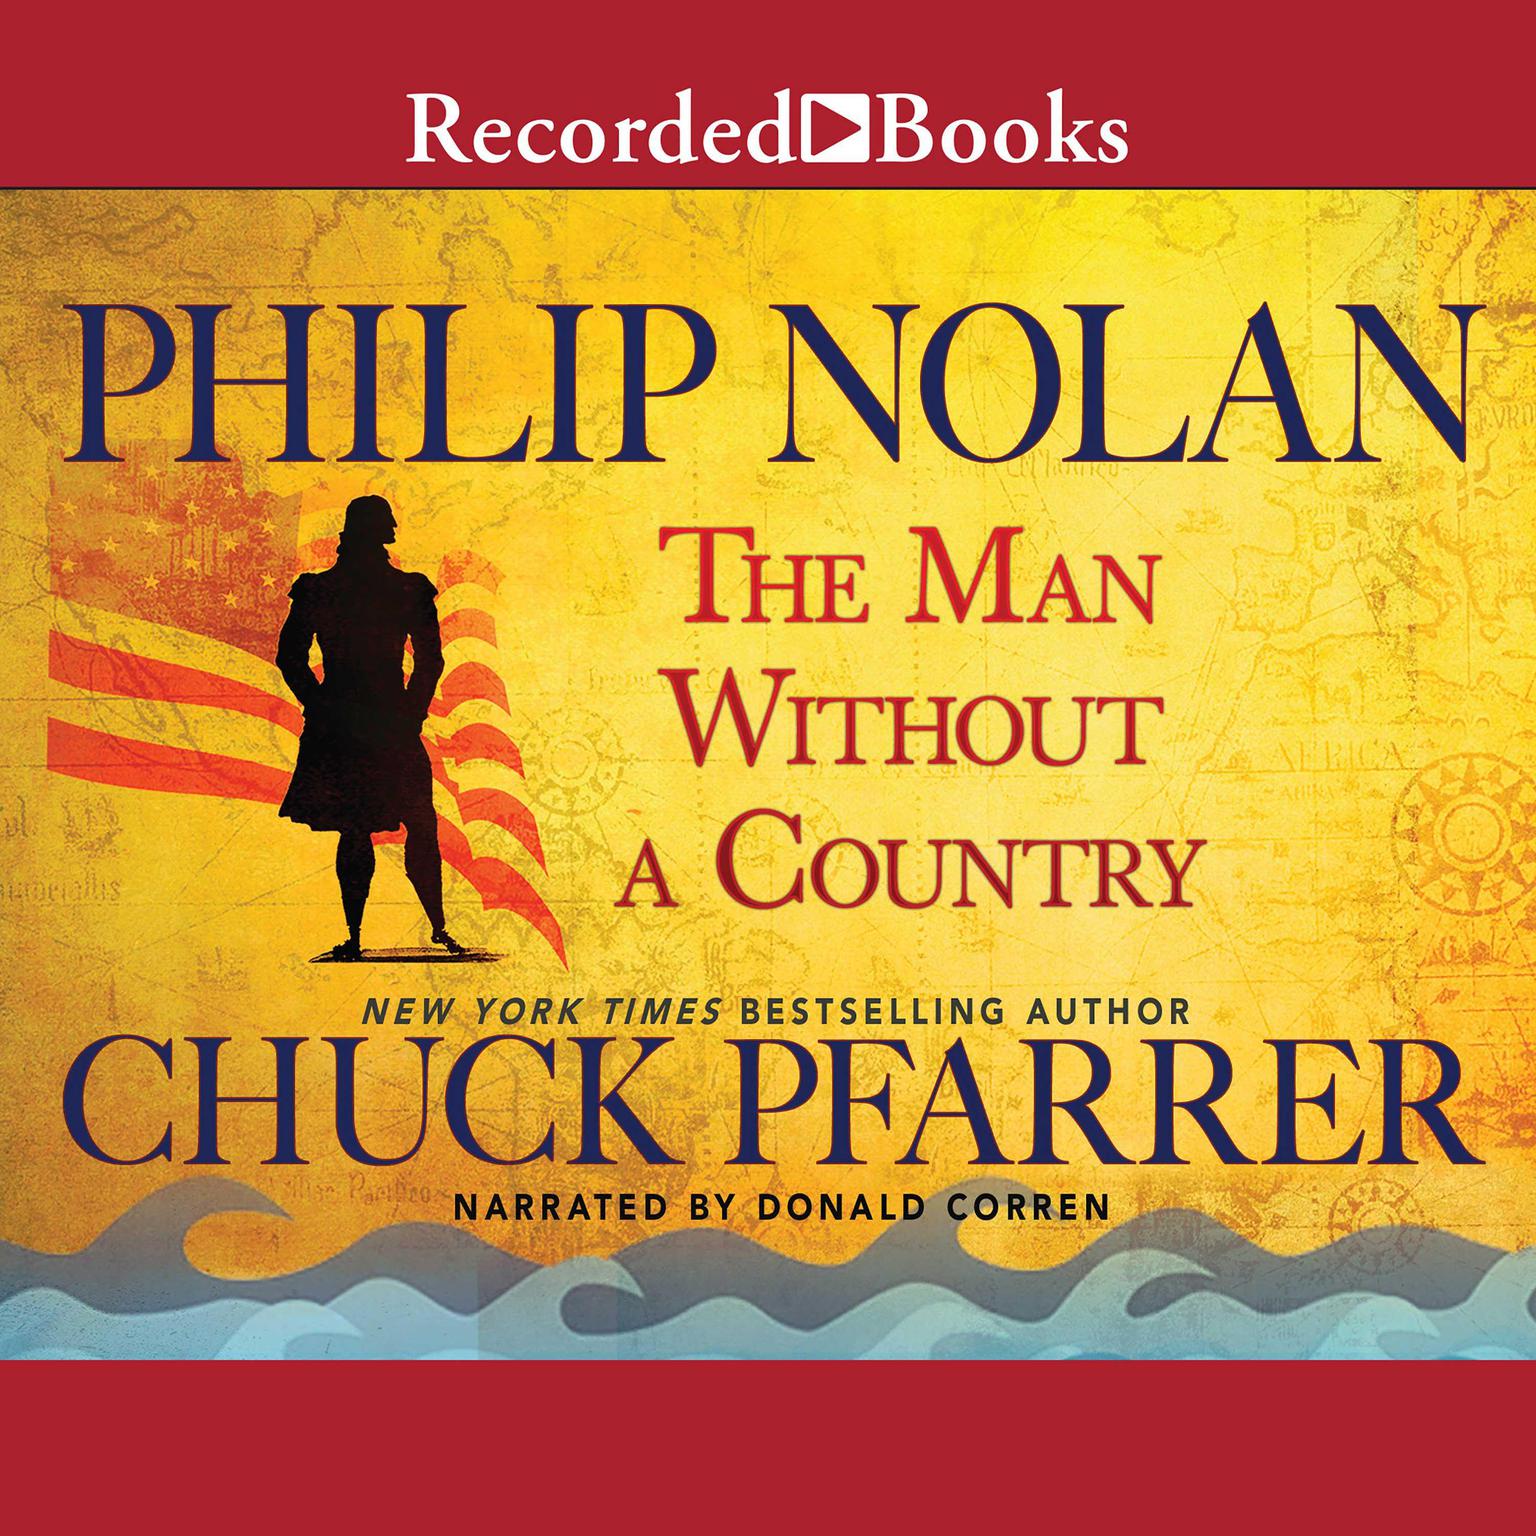 Philip Nolan: The Man Without a Country Audiobook, by Chuck Pfarrer